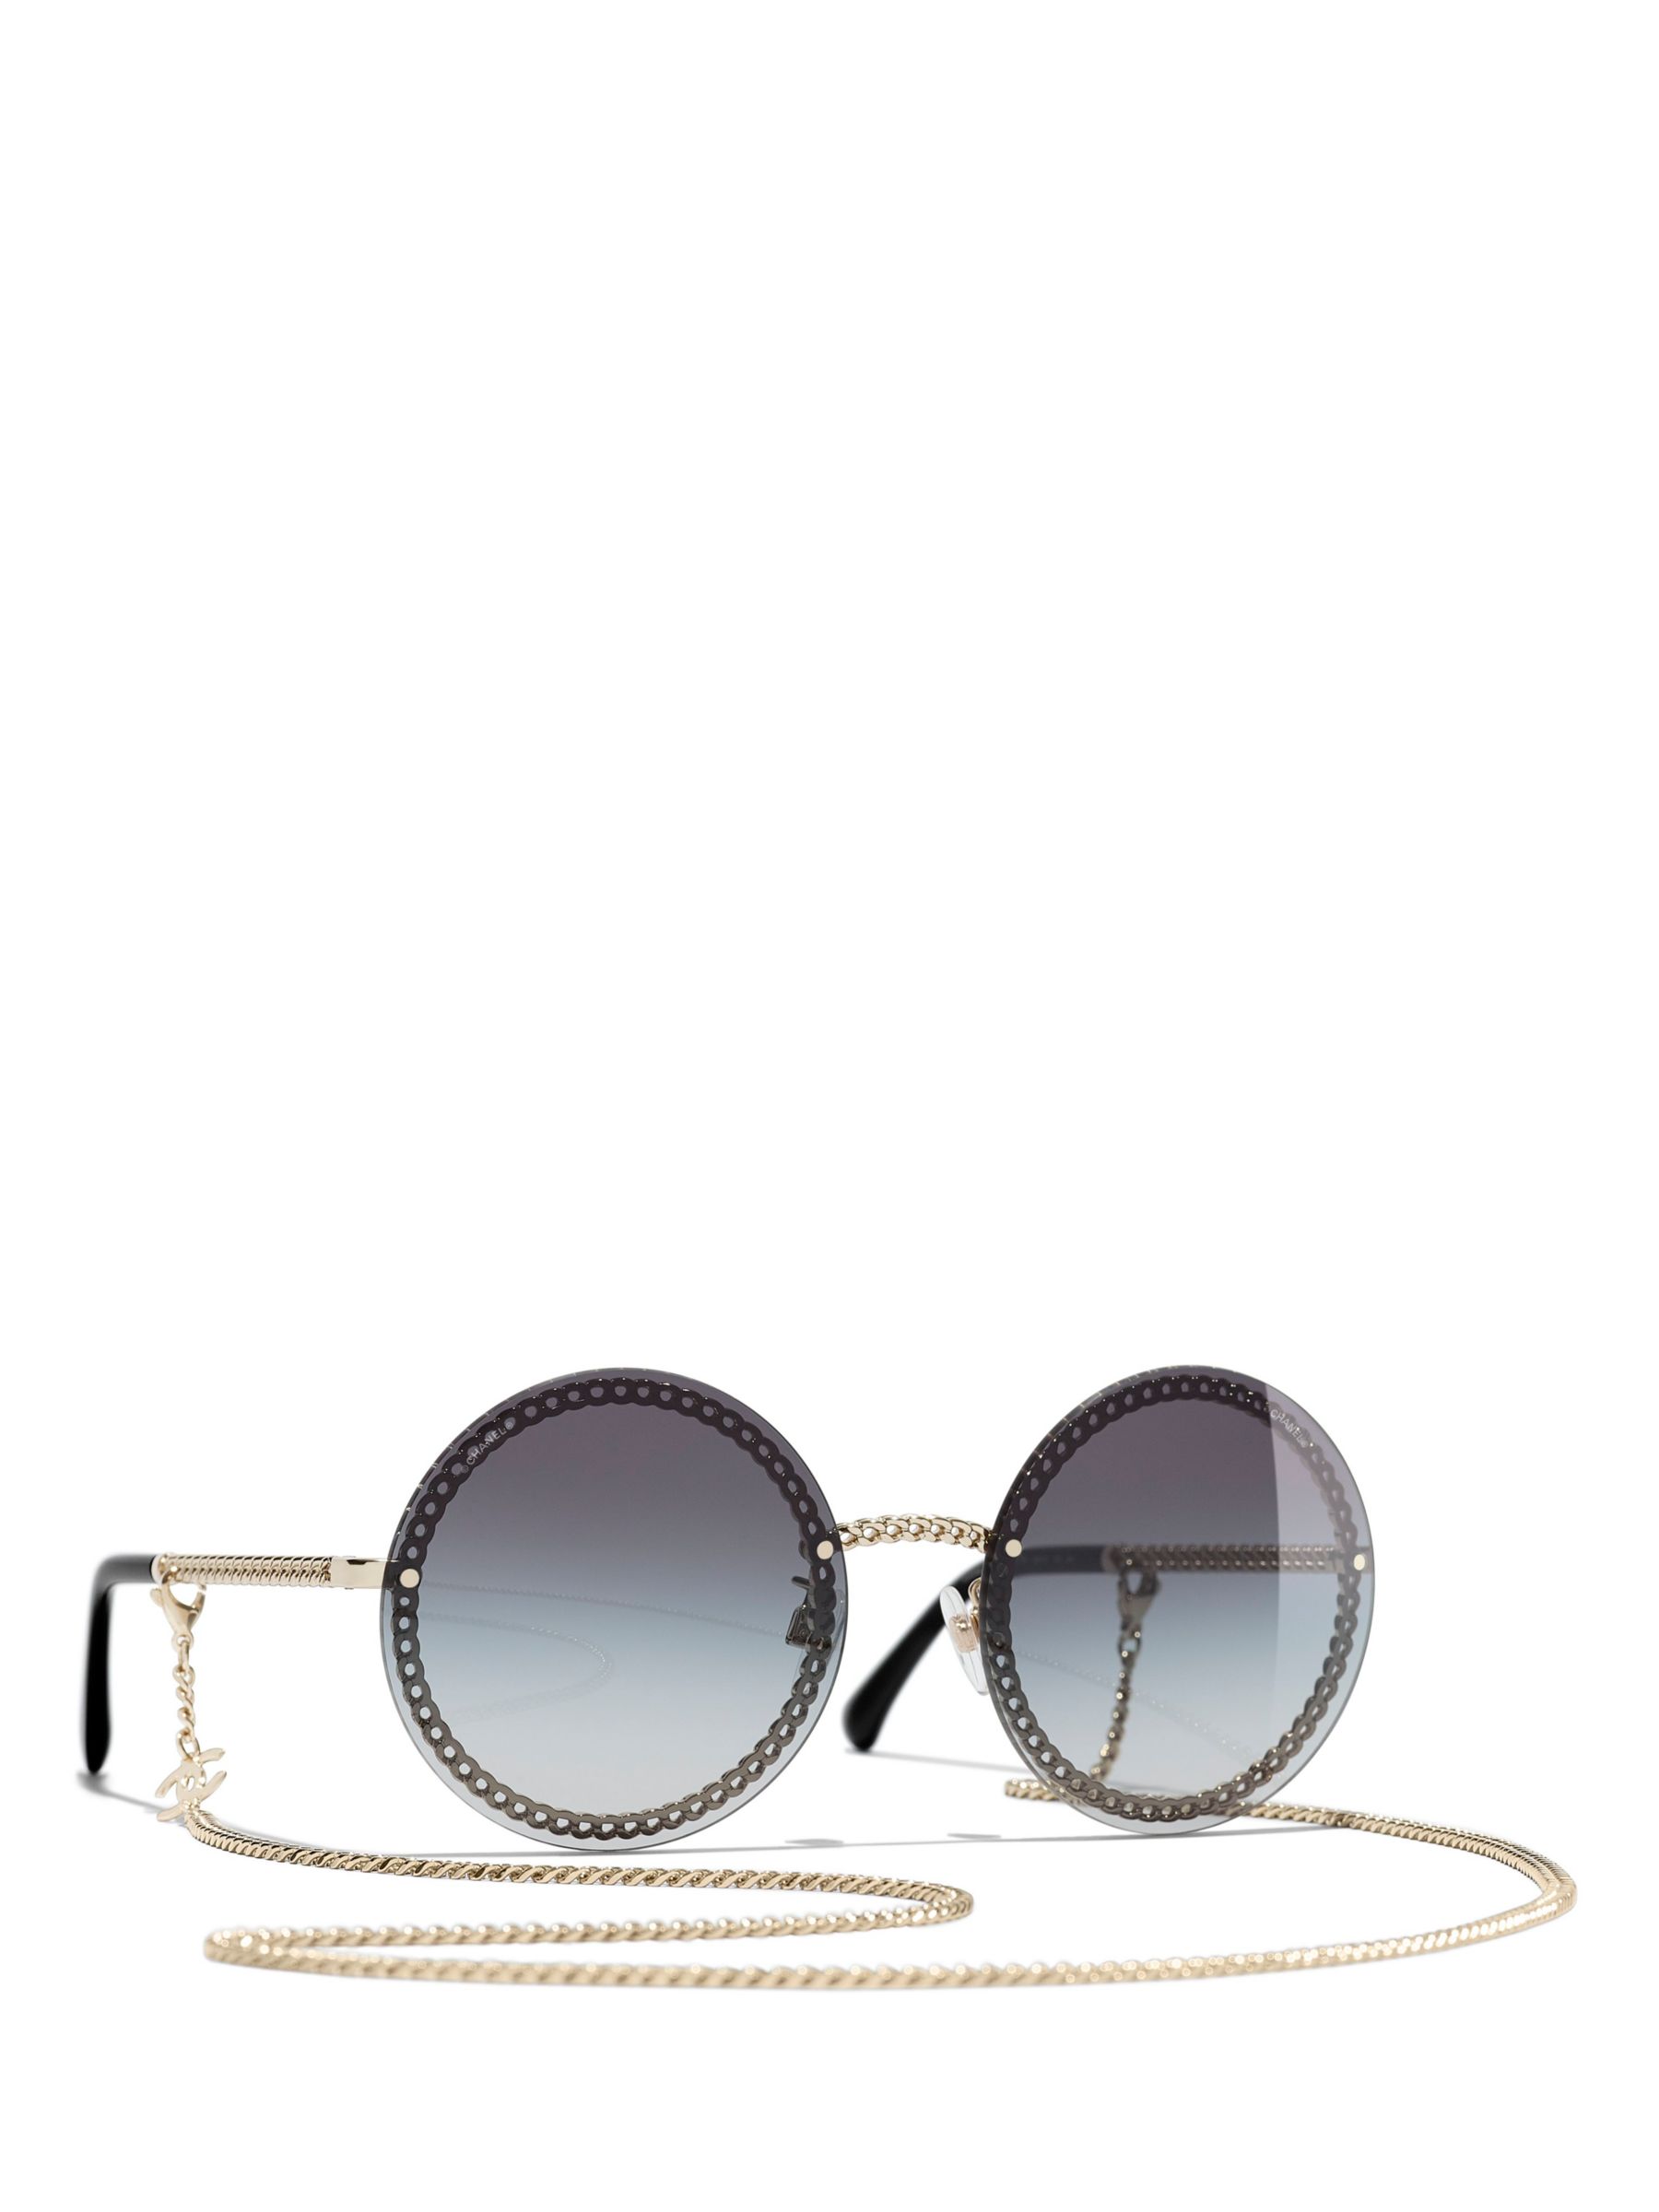 CHANEL Round Sunglasses CH4245 Gold/Grey Gradient at John Lewis & Partners